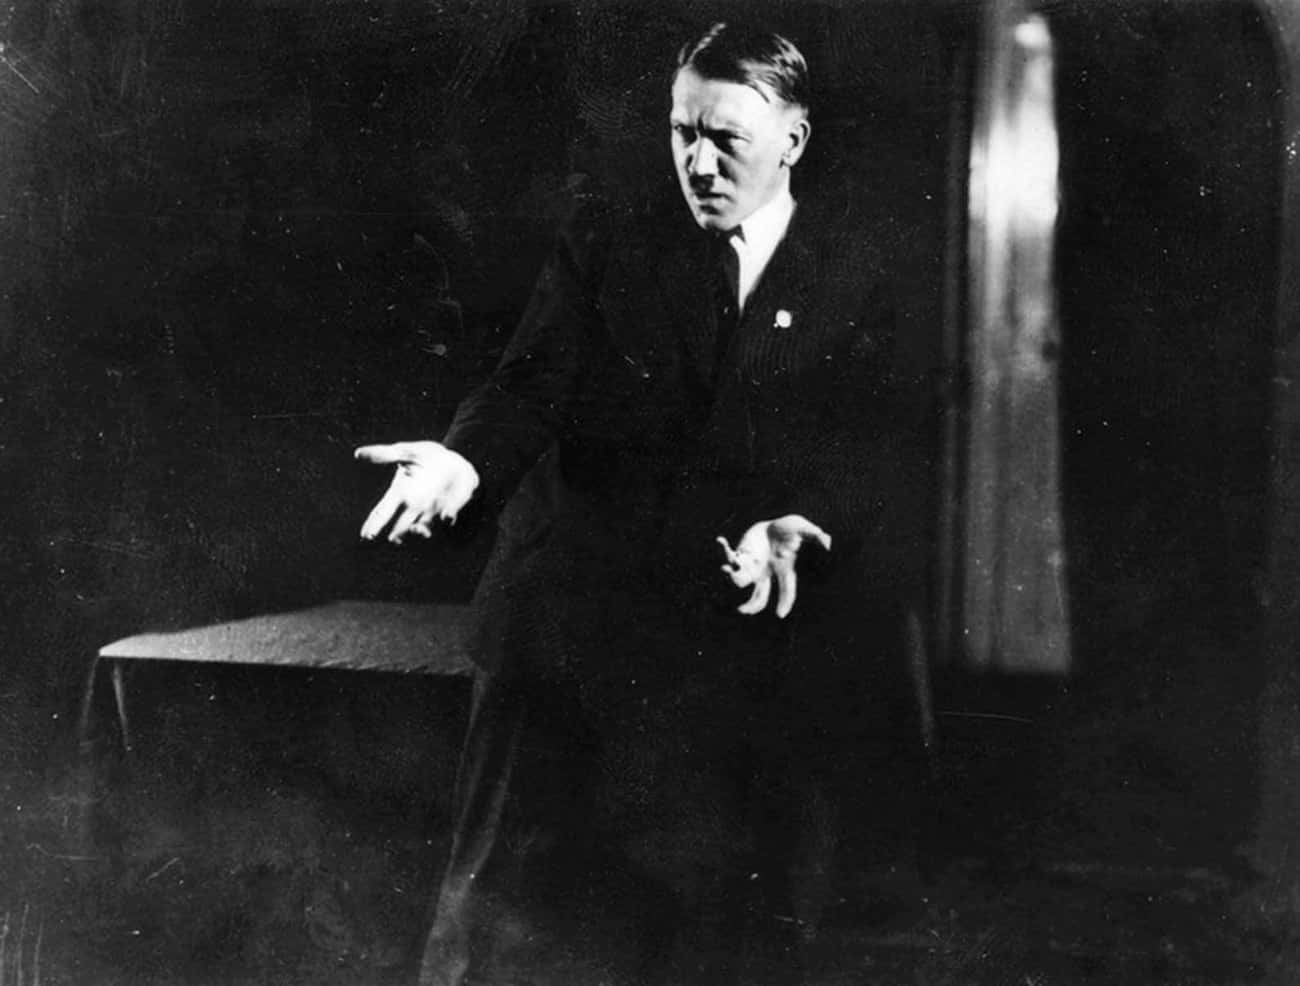 Hitler Had 'Dead' Eyes And 'Moist And Clammy' Hands